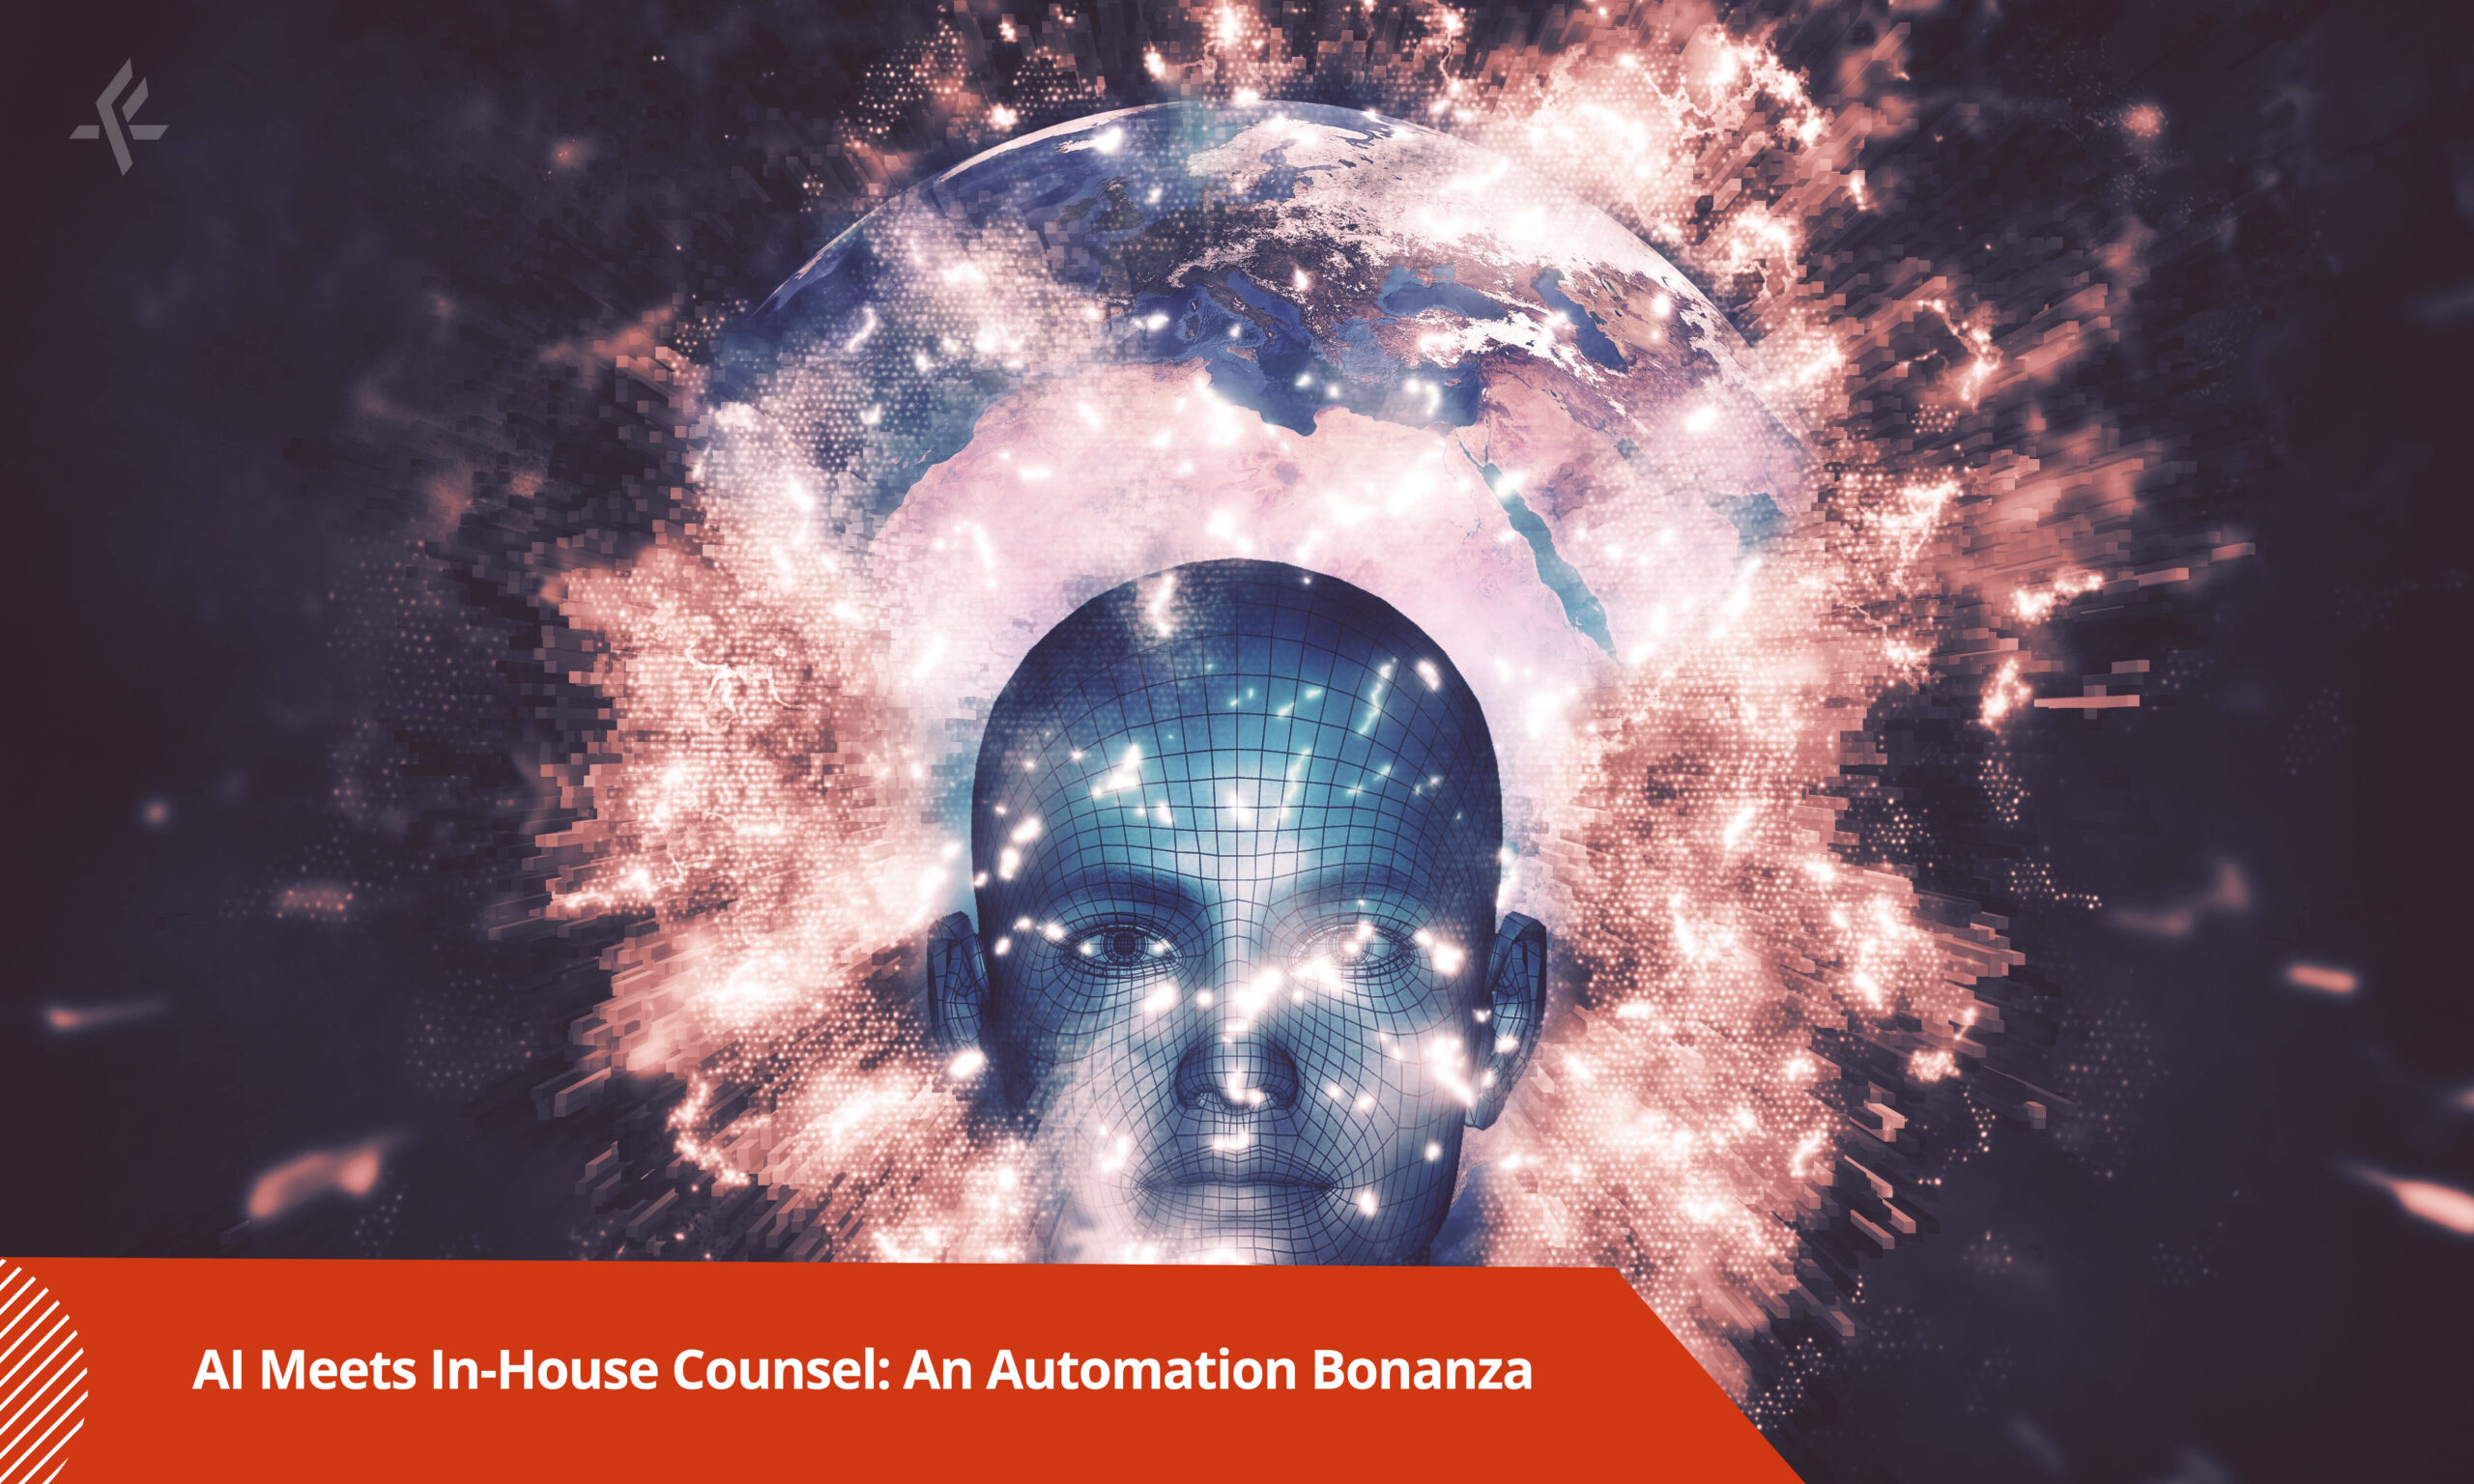 AI Meets In-House Counsel: An Automation Bonanza